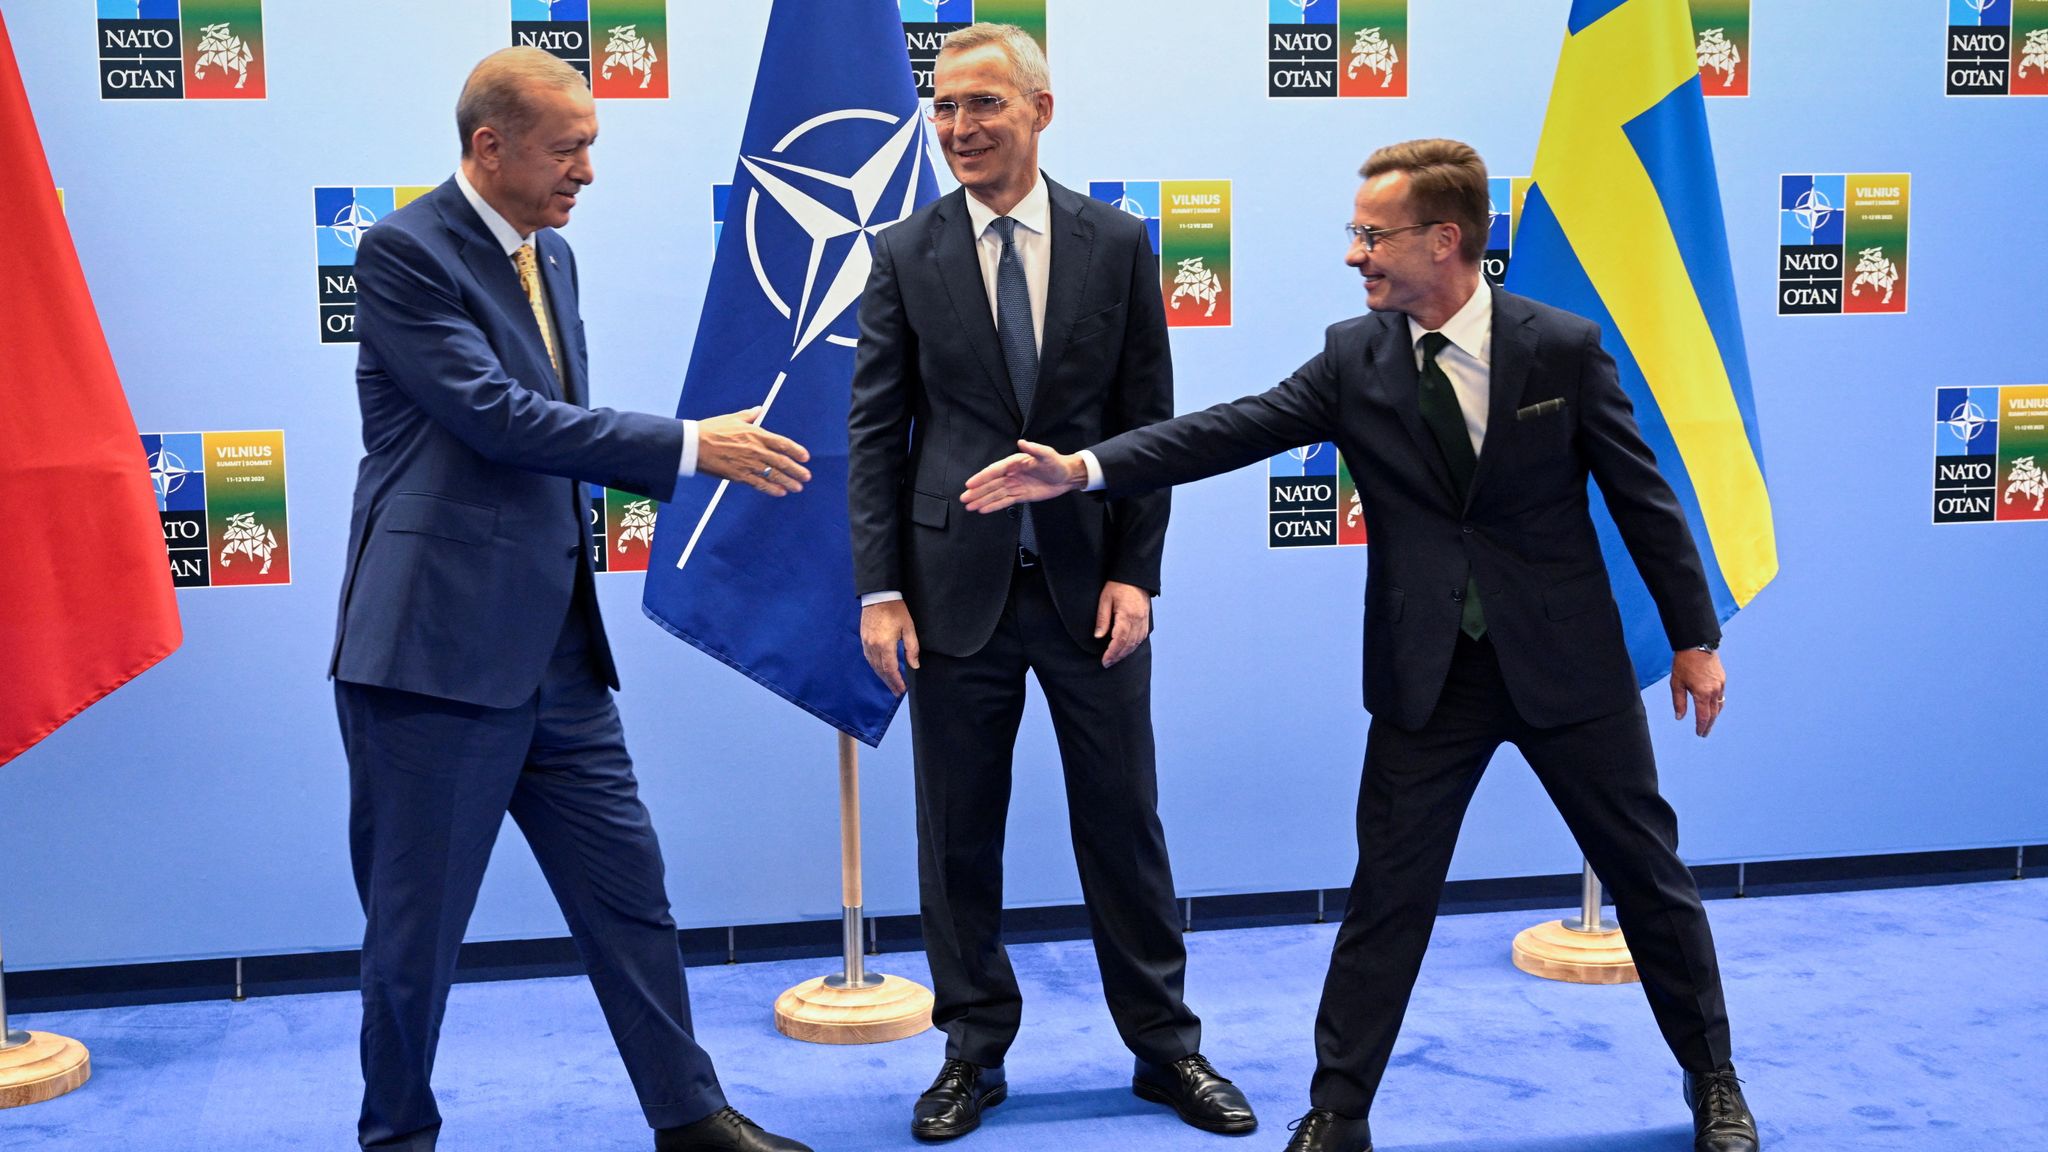 Sweden in NATO: A Historic Day